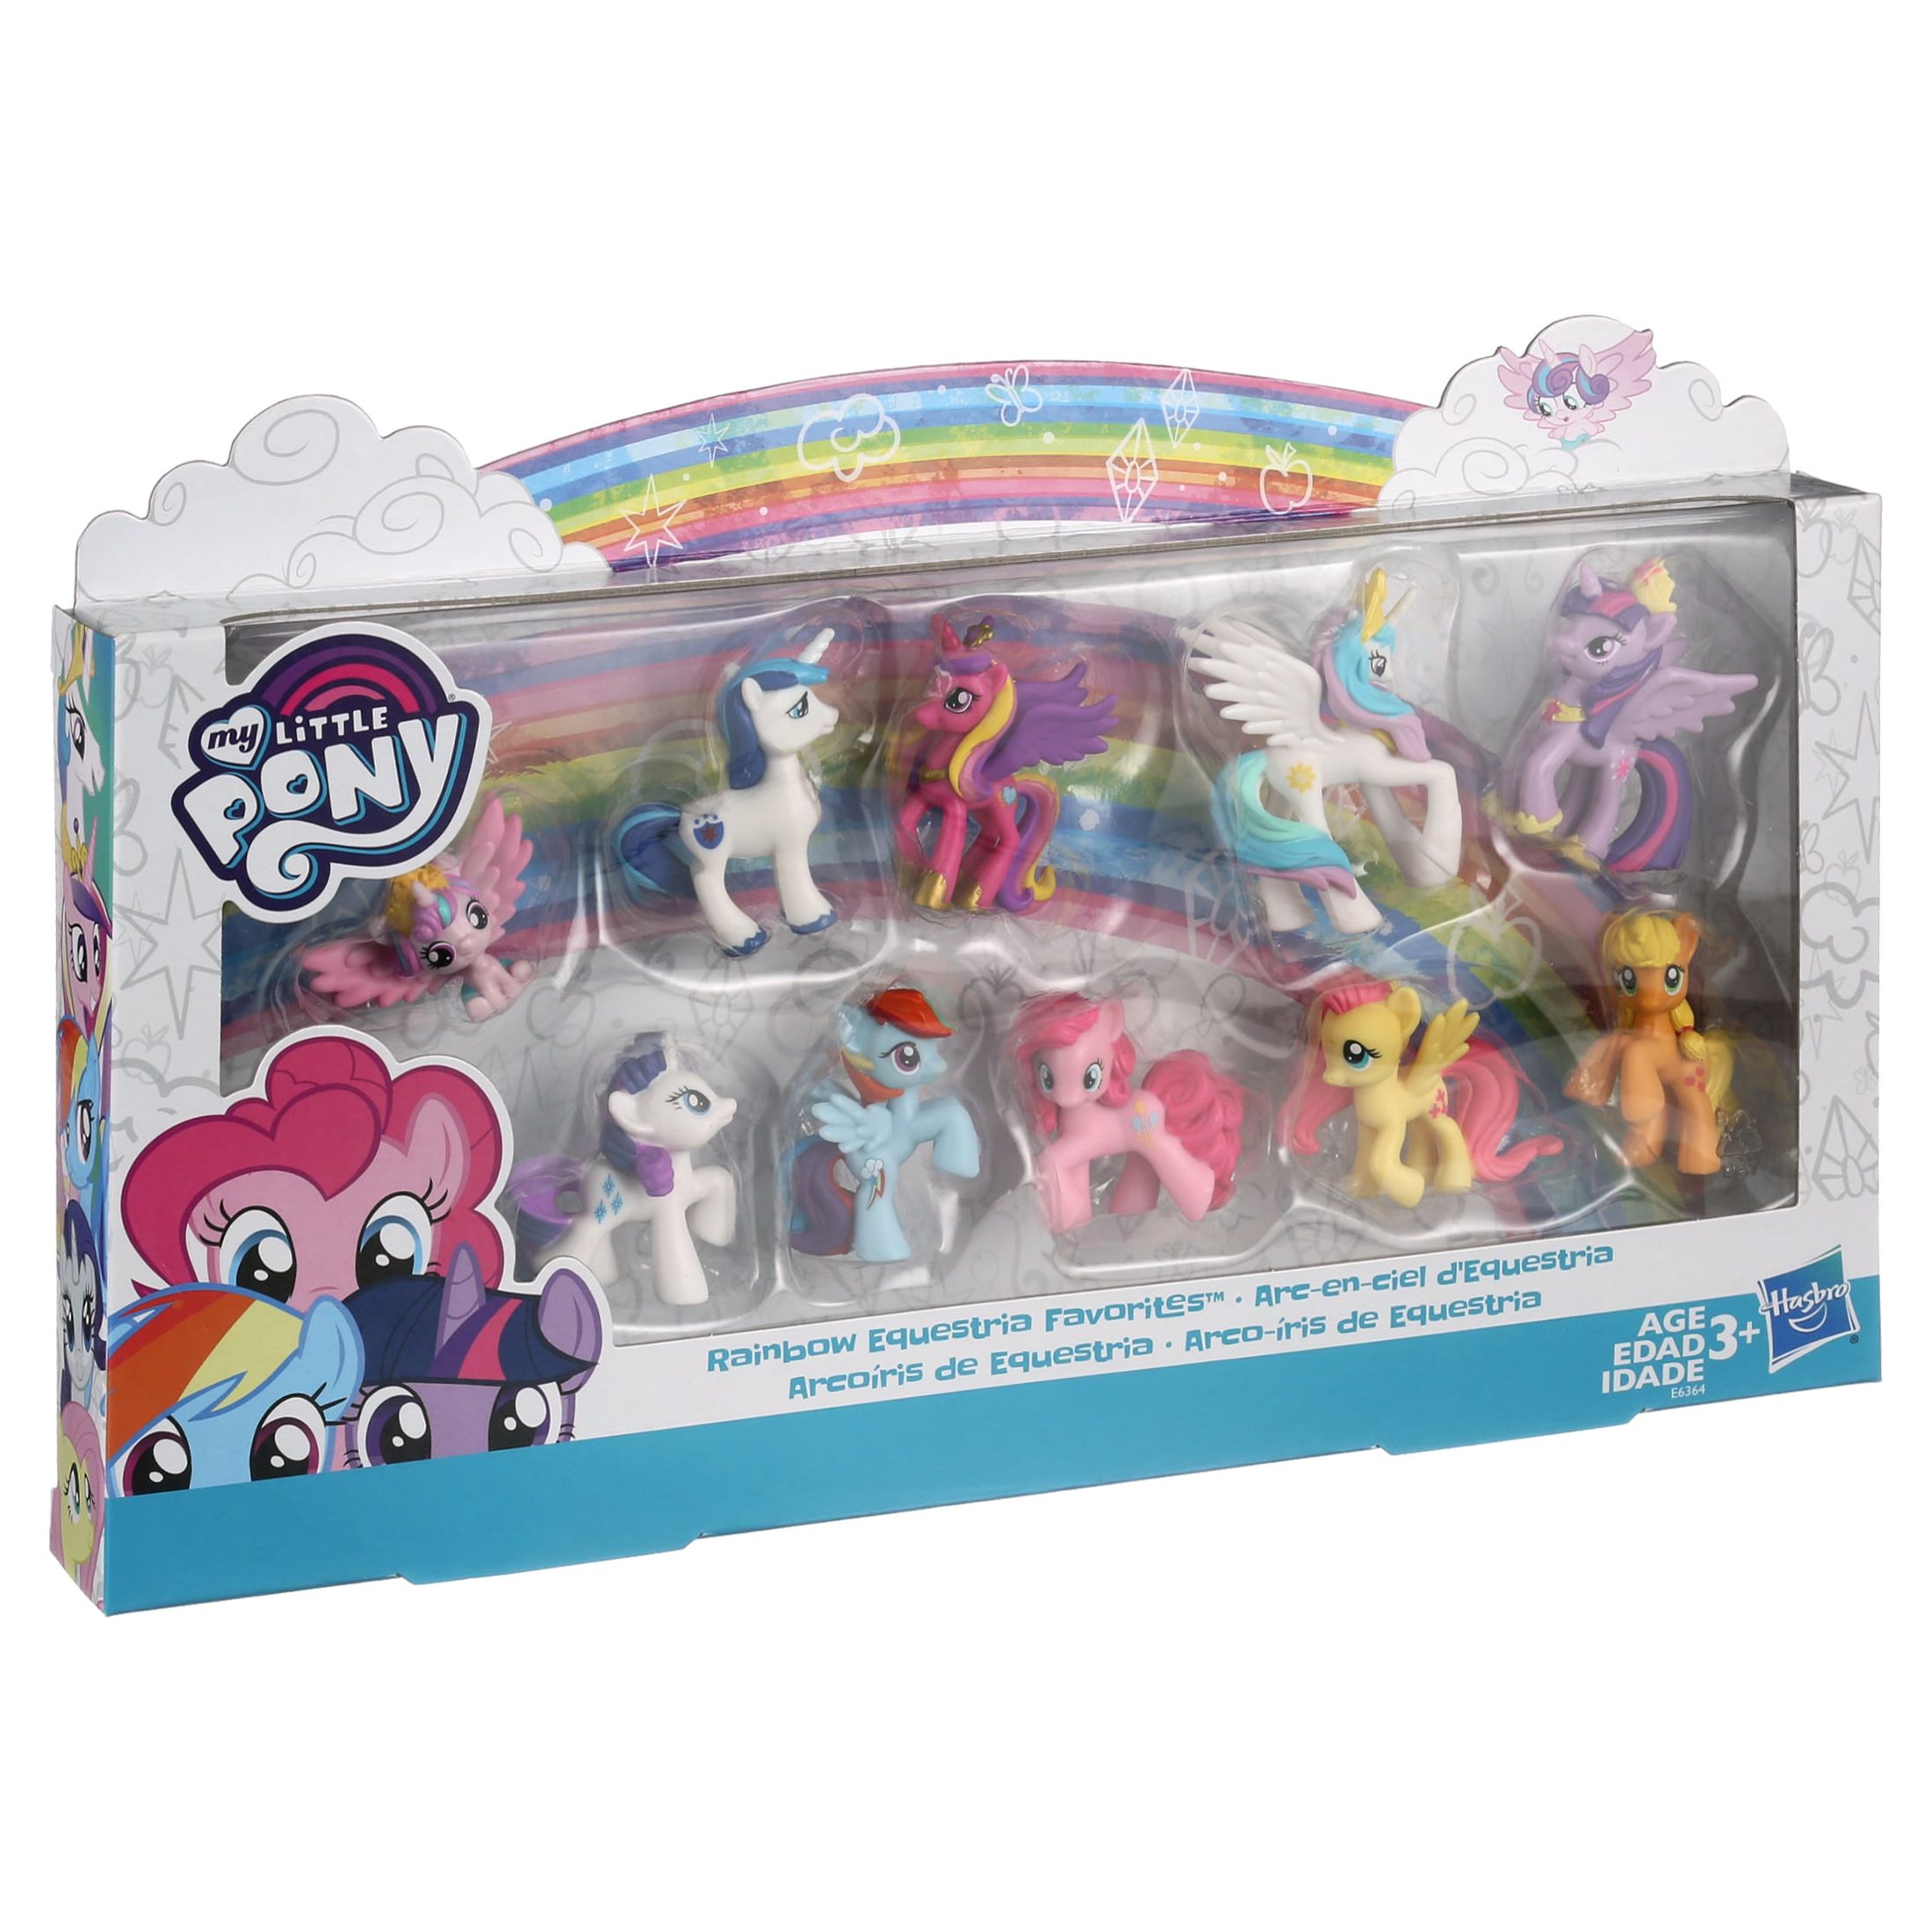 My Little Pony: Rainbow Equestria Favorites 13-Inch Doll Kids Toy for Boys and Girls - image 3 of 8